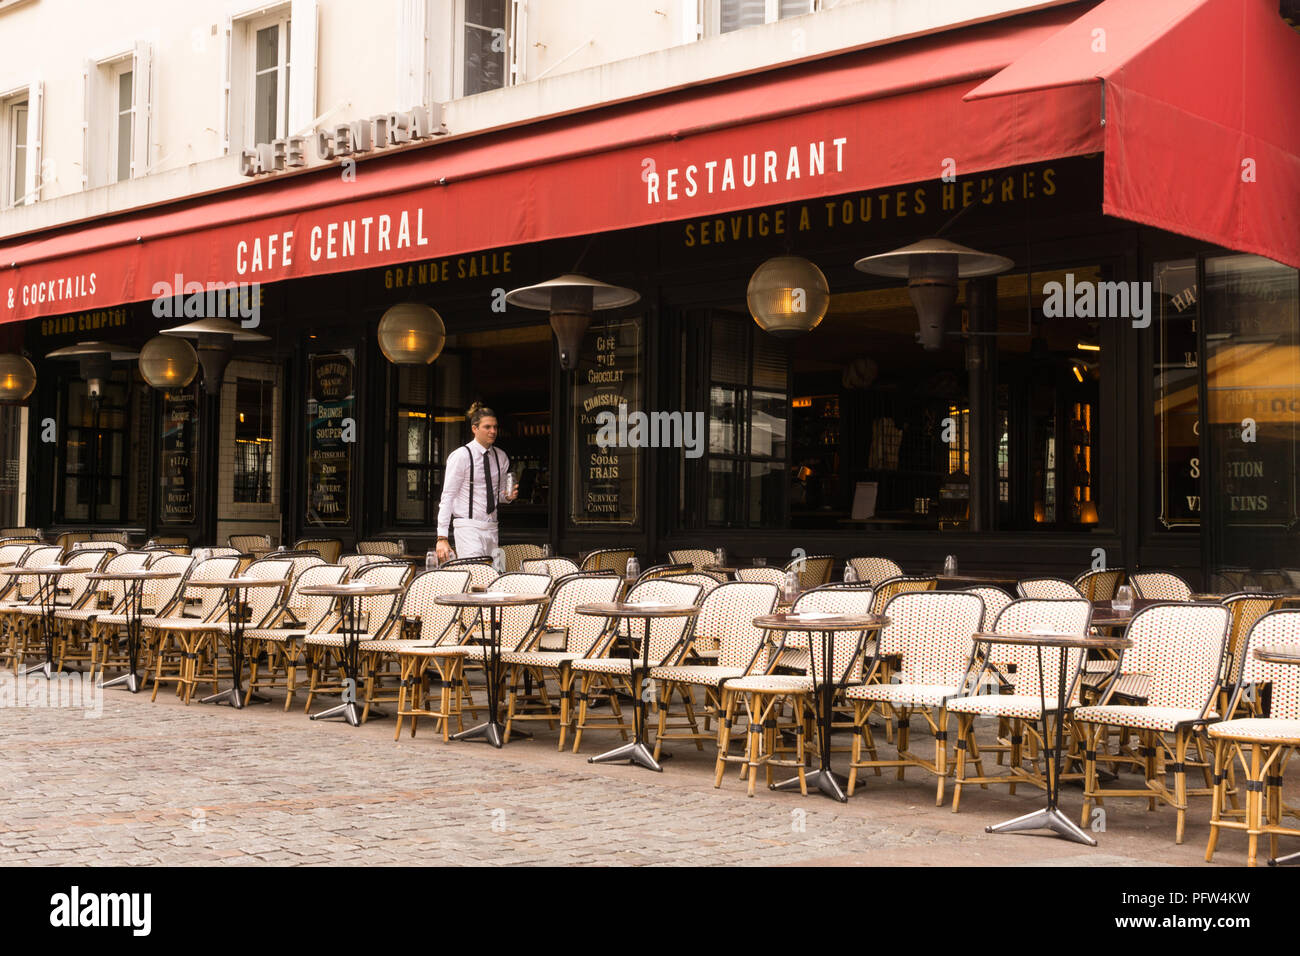 Paris waiter - A Parisian waiter sets the tables at the Cafe Central restaurant on Rue Cler in Paris, France, Europe. Stock Photo